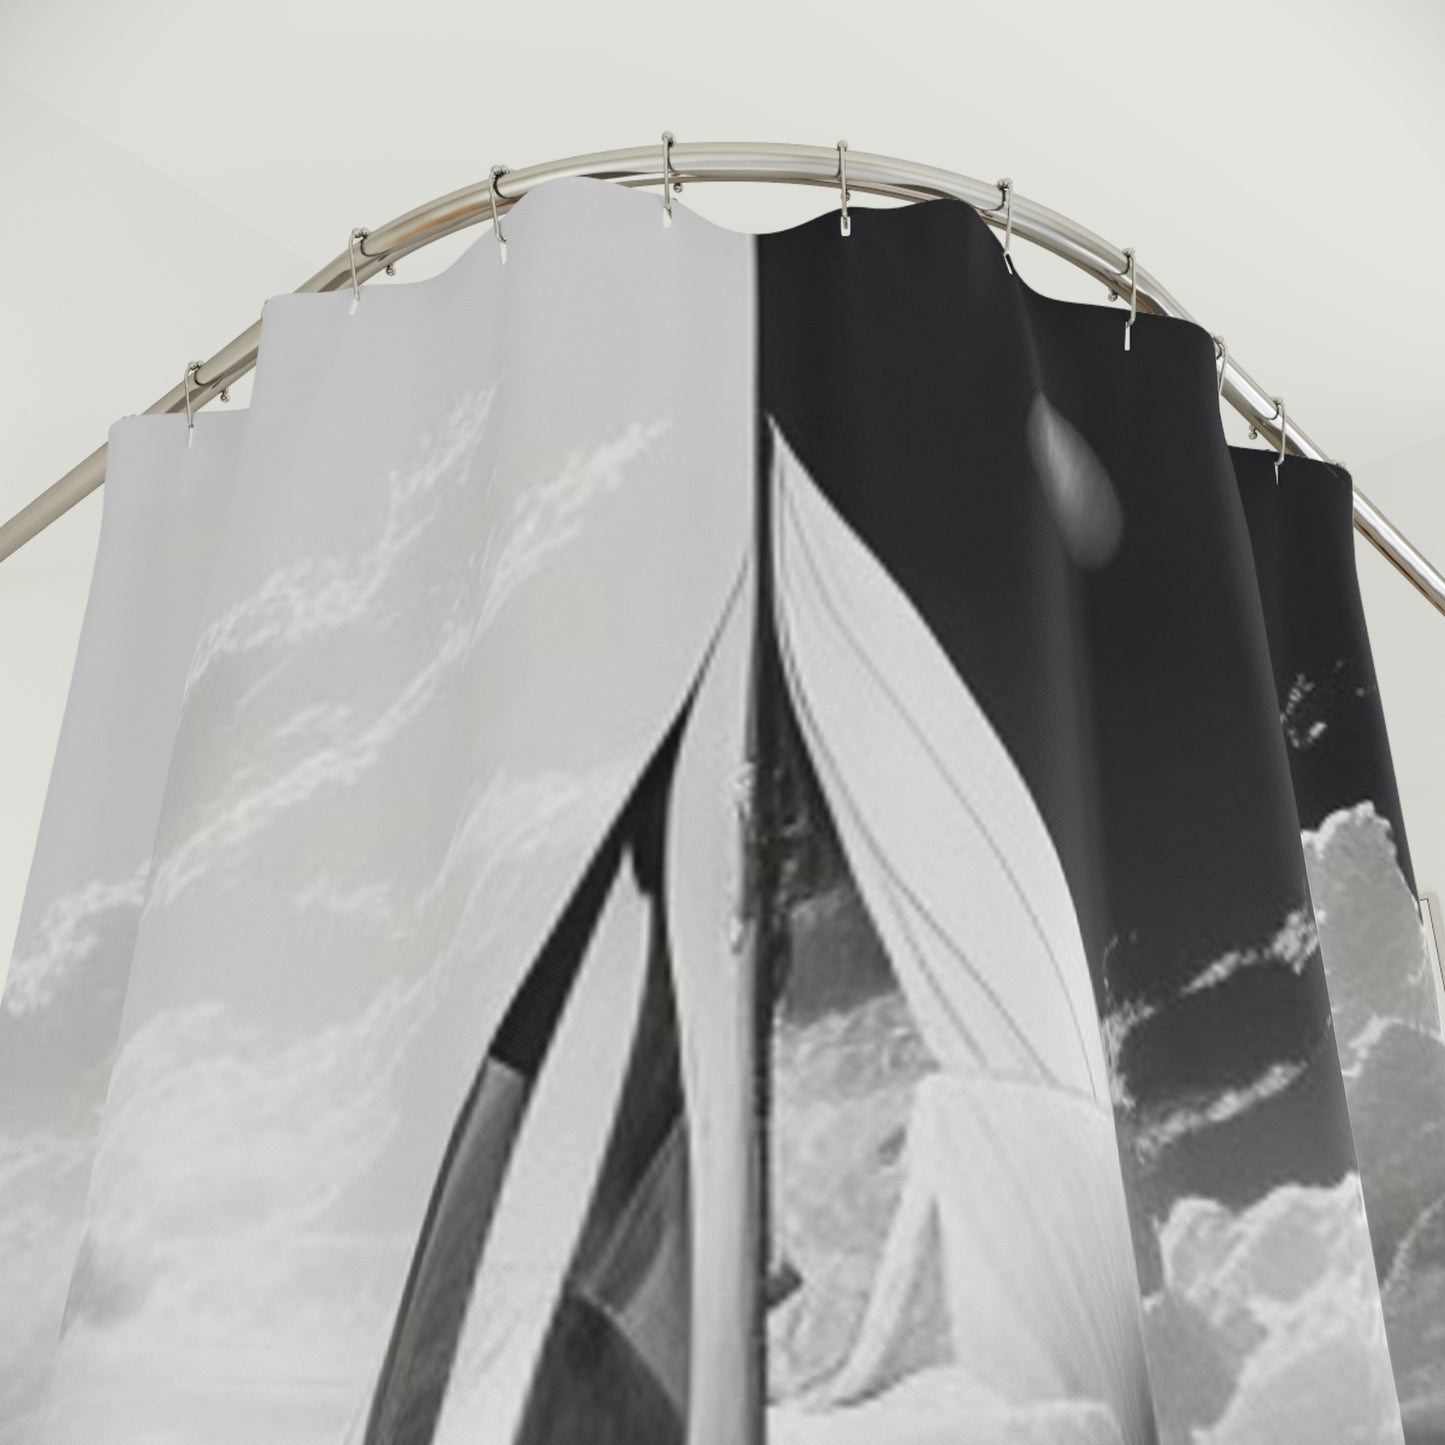 Polyester Shower Curtain black and white sailboat 1